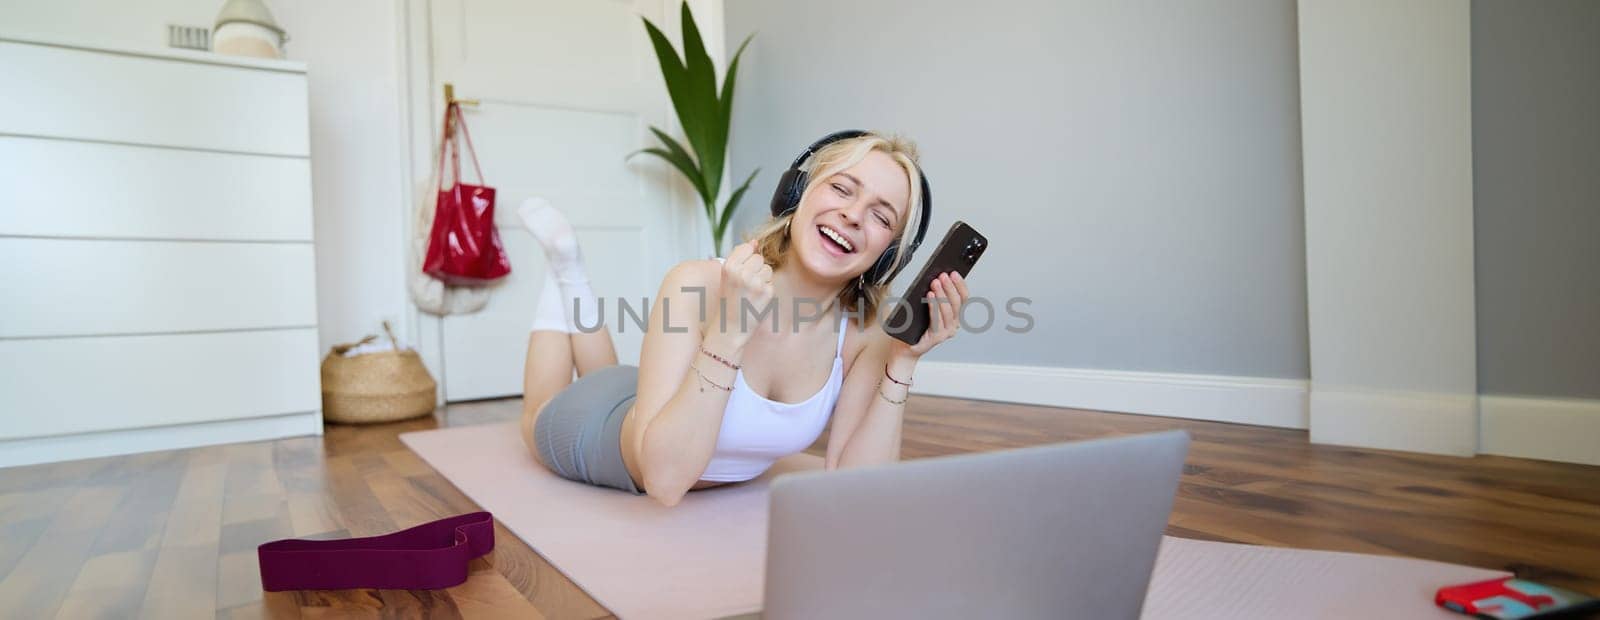 Portrait of woman lying on rubber yoga mat in room, wearing headphones, listens to music, using laptop and smartphone. Lifestyle and wellbeing concept